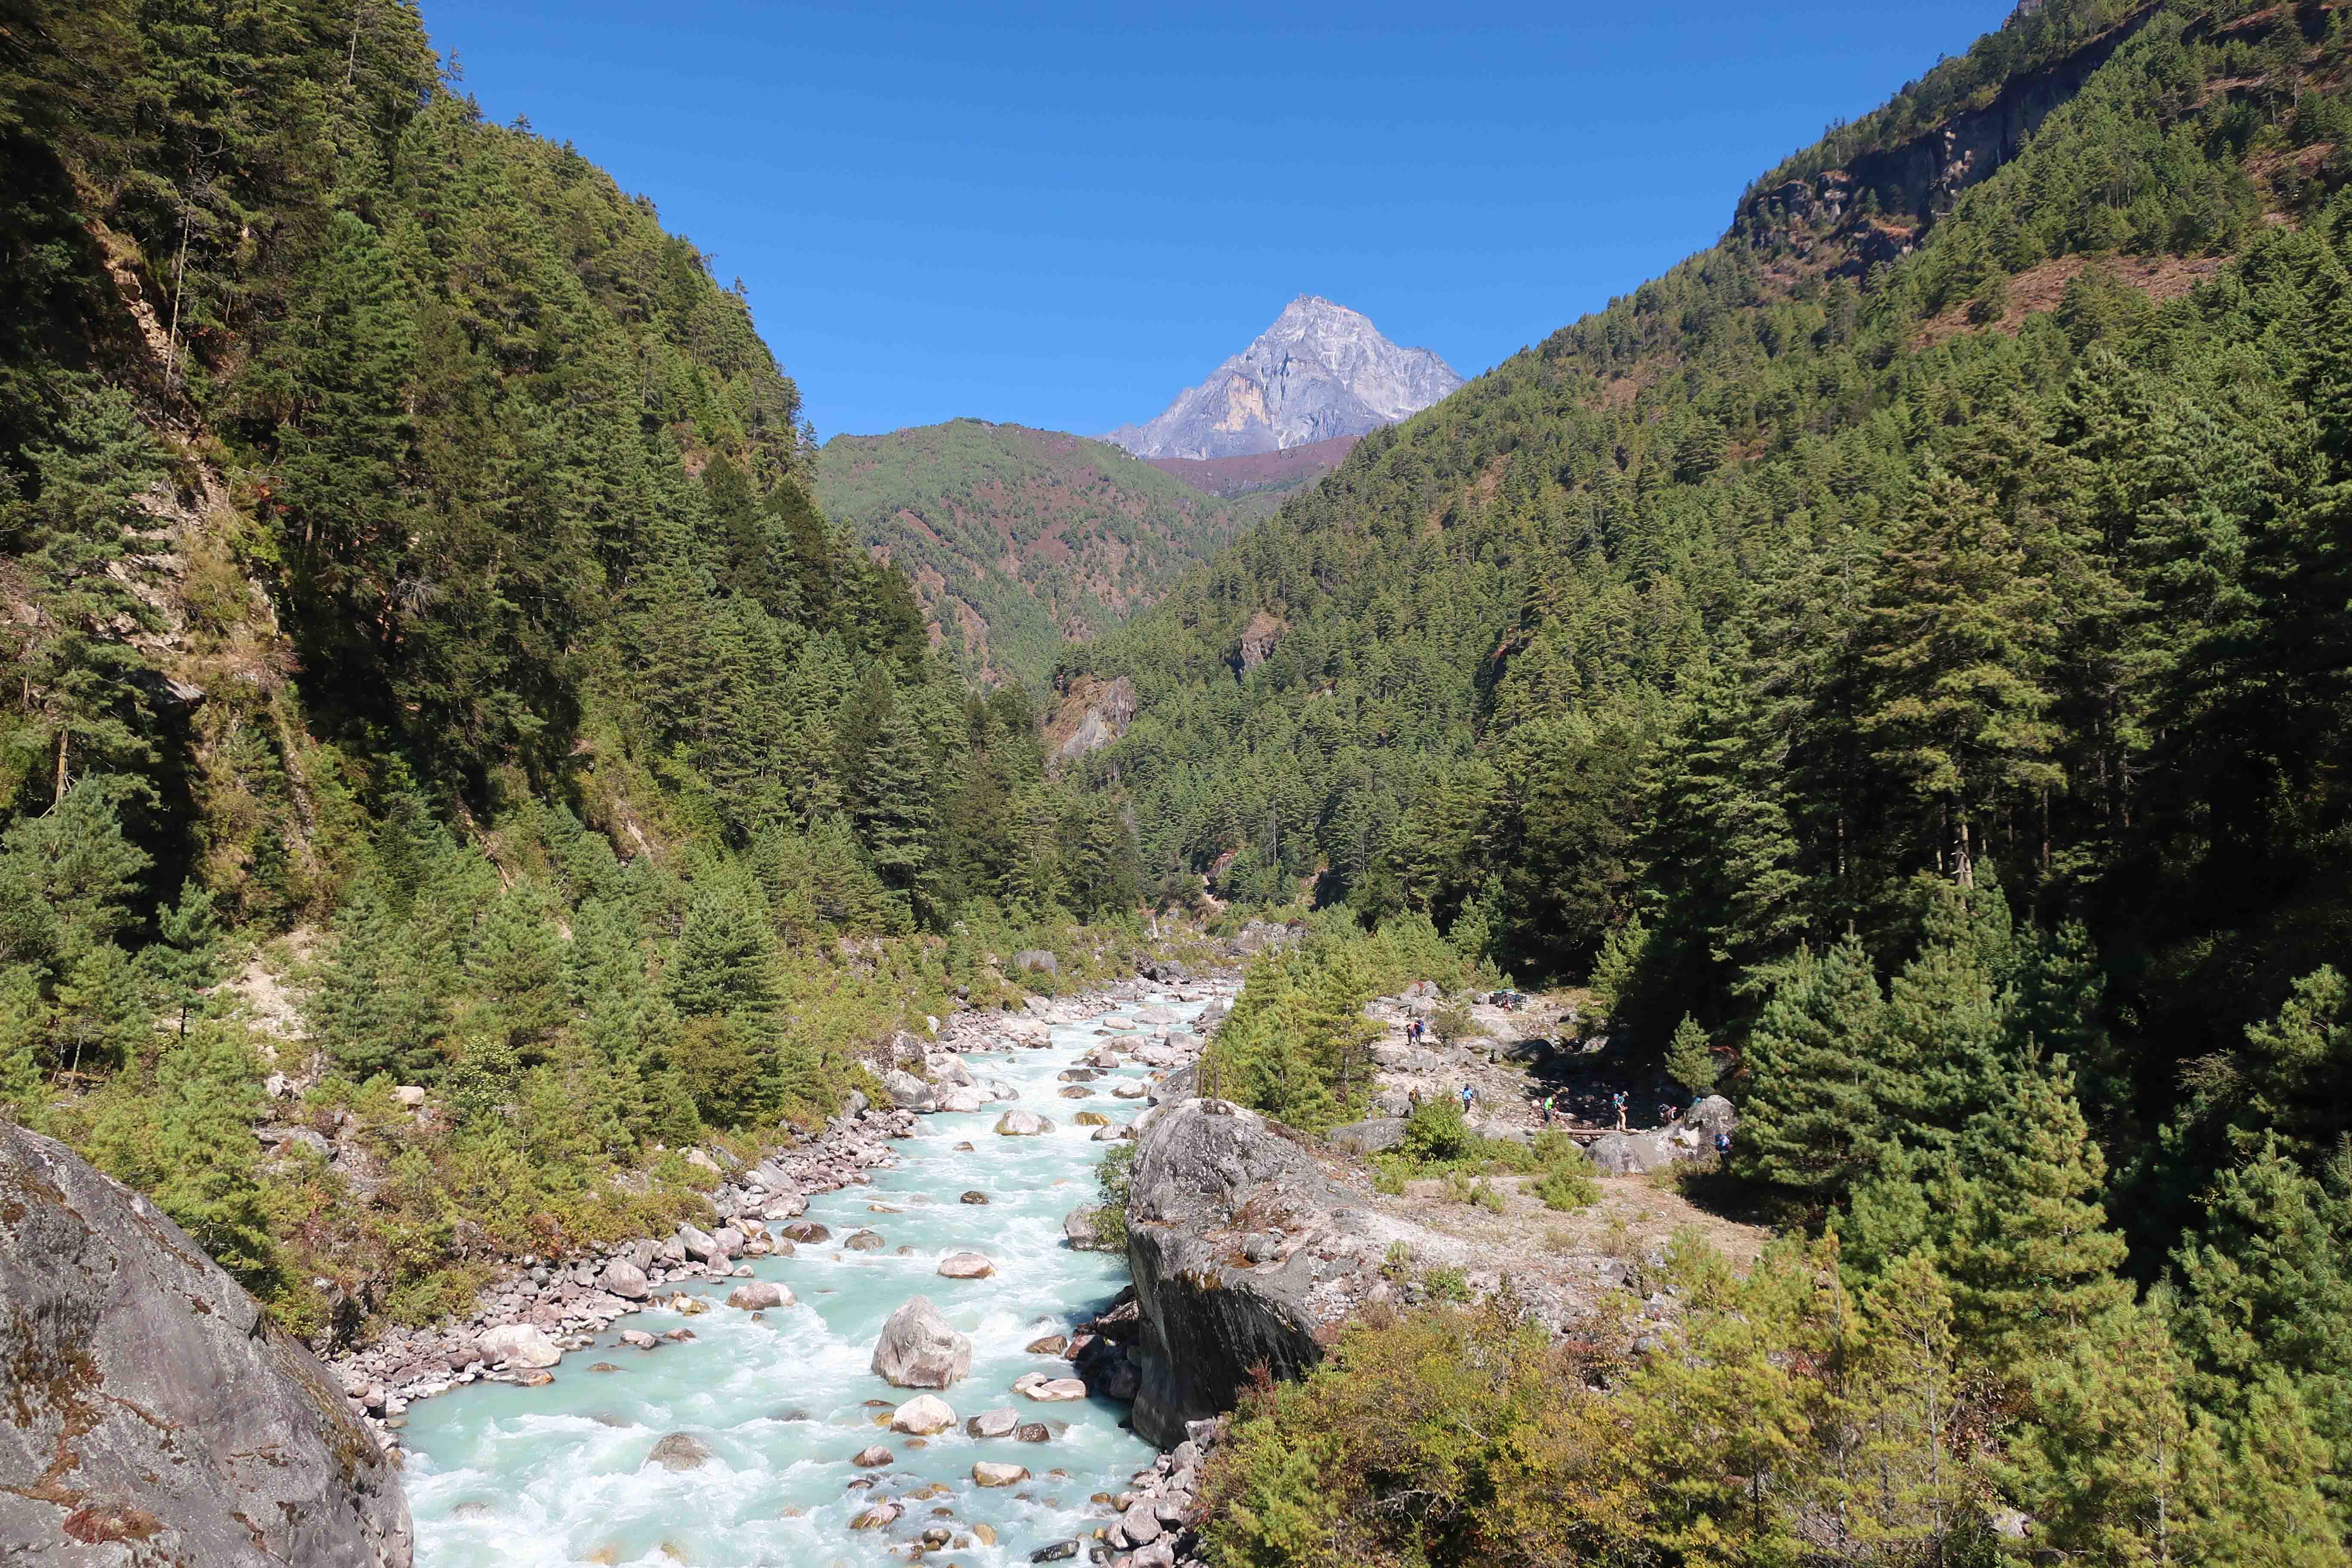 Glacial river on the way from Namche Bazaar to Lukla